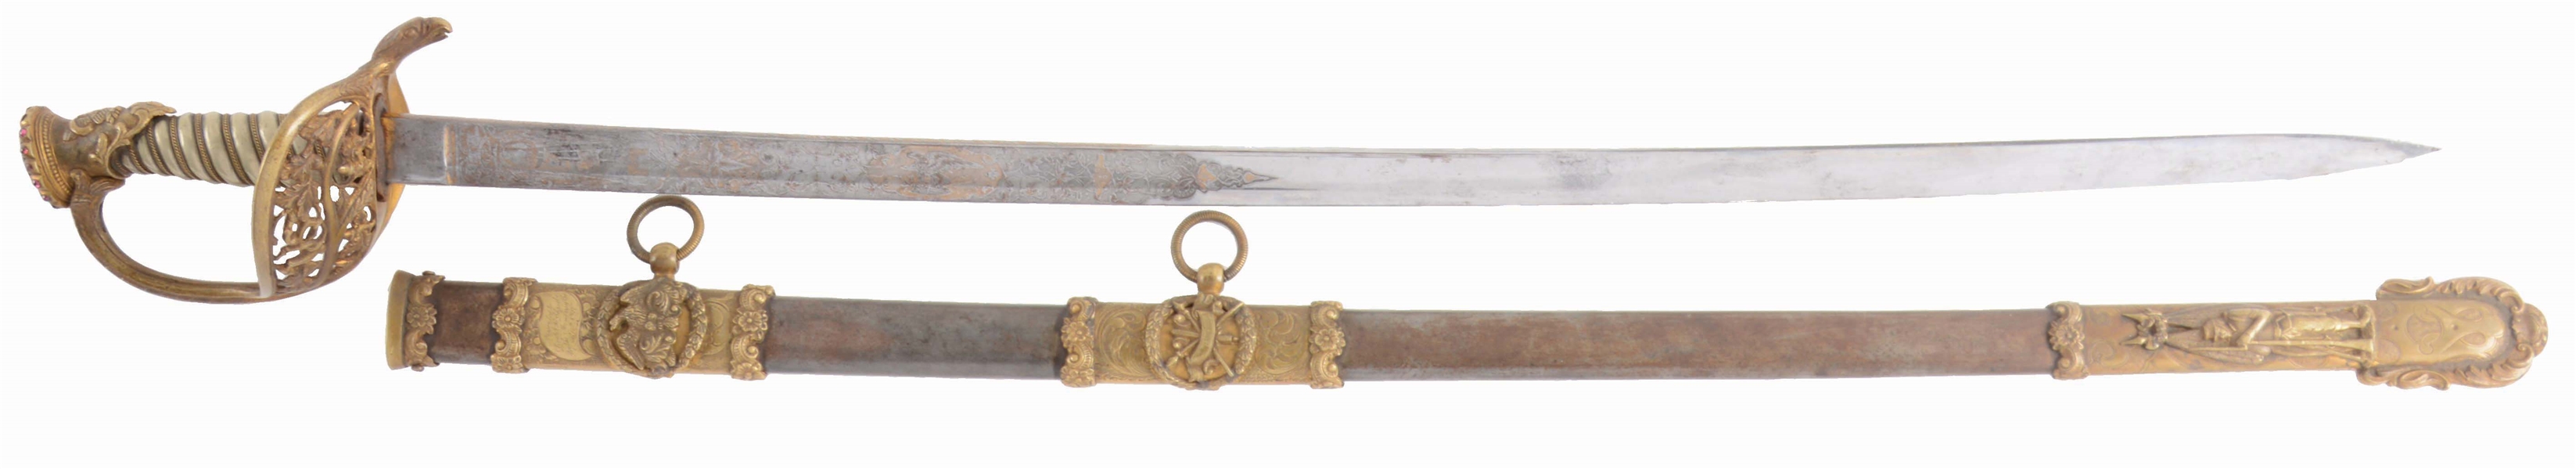 A FINE AND ELABORATE CIVIL WAR PRESENTATION SWORD PRESENTED TO LIEUTENANT J. H. CHRISTY BY THE MEMBERS OF COMPANY H, 17TH VOLUNTEERS NEW YORK.